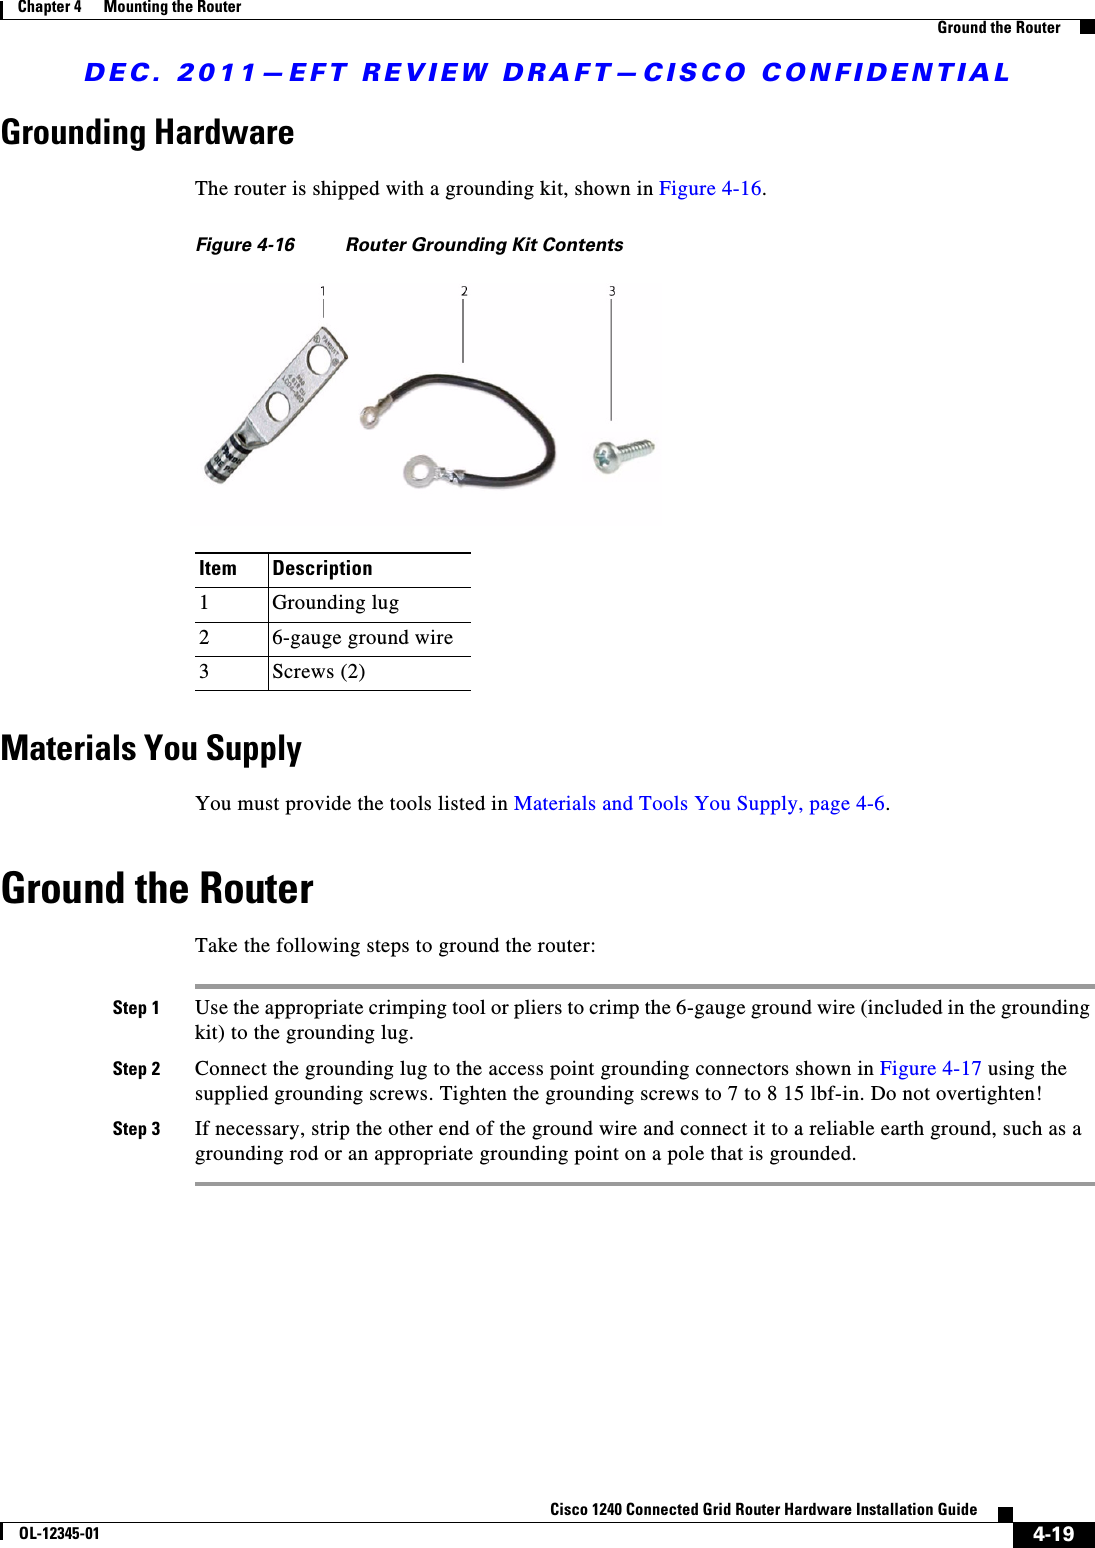 DEC. 2011—EFT REVIEW DRAFT—CISCO CONFIDENTIAL4-19Cisco 1240 Connected Grid Router Hardware Installation GuideOL-12345-01Chapter 4      Mounting the Router  Ground the RouterGrounding HardwareThe router is shipped with a grounding kit, shown in Figure 4-16.Figure 4-16 Router Grounding Kit ContentsMaterials You SupplyYou must provide the tools listed in Materials and Tools You Supply, page 4-6.Ground the RouterTake the following steps to ground the router:Step 1 Use the appropriate crimping tool or pliers to crimp the 6-gauge ground wire (included in the grounding kit) to the grounding lug.Step 2 Connect the grounding lug to the access point grounding connectors shown in Figure 4-17 using the supplied grounding screws. Tighten the grounding screws to 7 to 8 15 lbf-in. Do not overtighten!Step 3 If necessary, strip the other end of the ground wire and connect it to a reliable earth ground, such as a grounding rod or an appropriate grounding point on a pole that is grounded.Item Description1Grounding lug26-gauge ground wire3Screws (2)